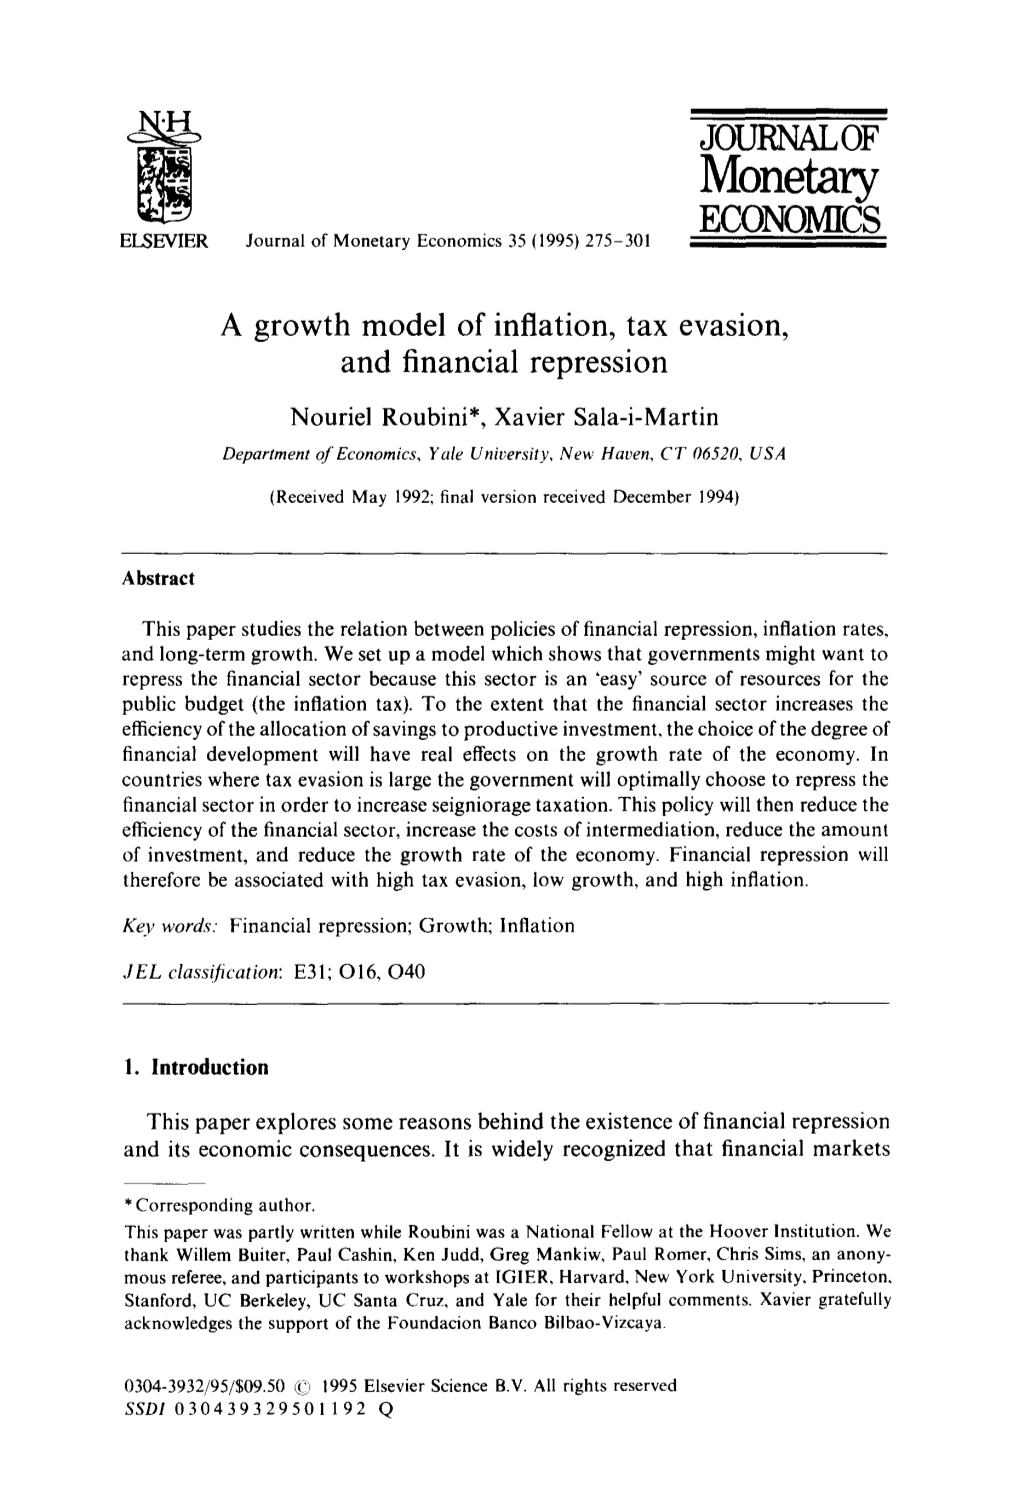 A Growth Model of Inflation, Tax Evasion, and Financial Repression